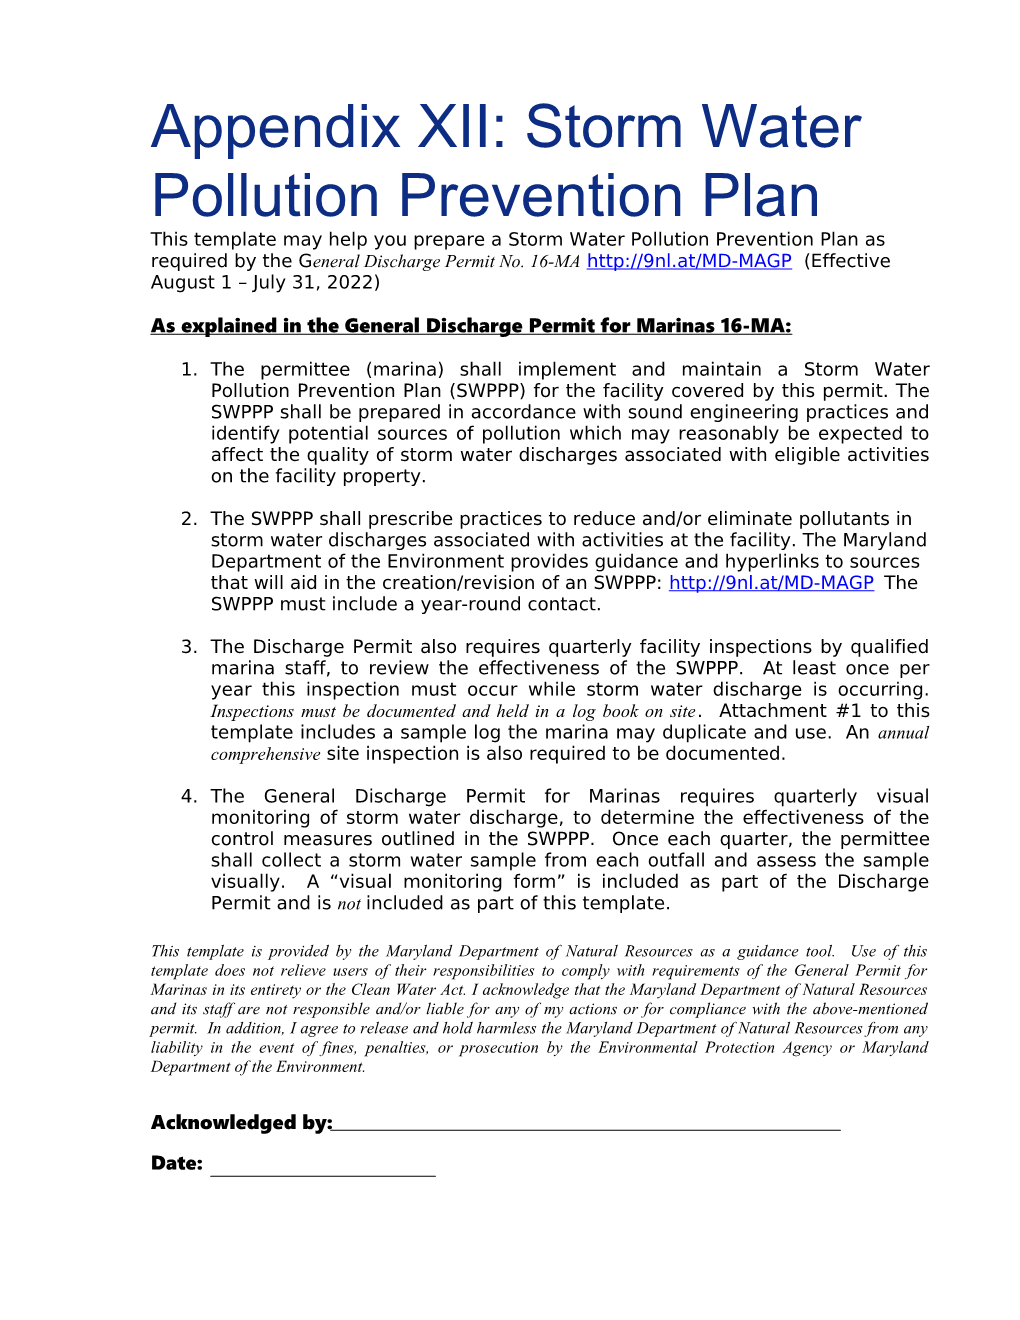 Appendix XII: Stormwater Pollution Prevention Plan